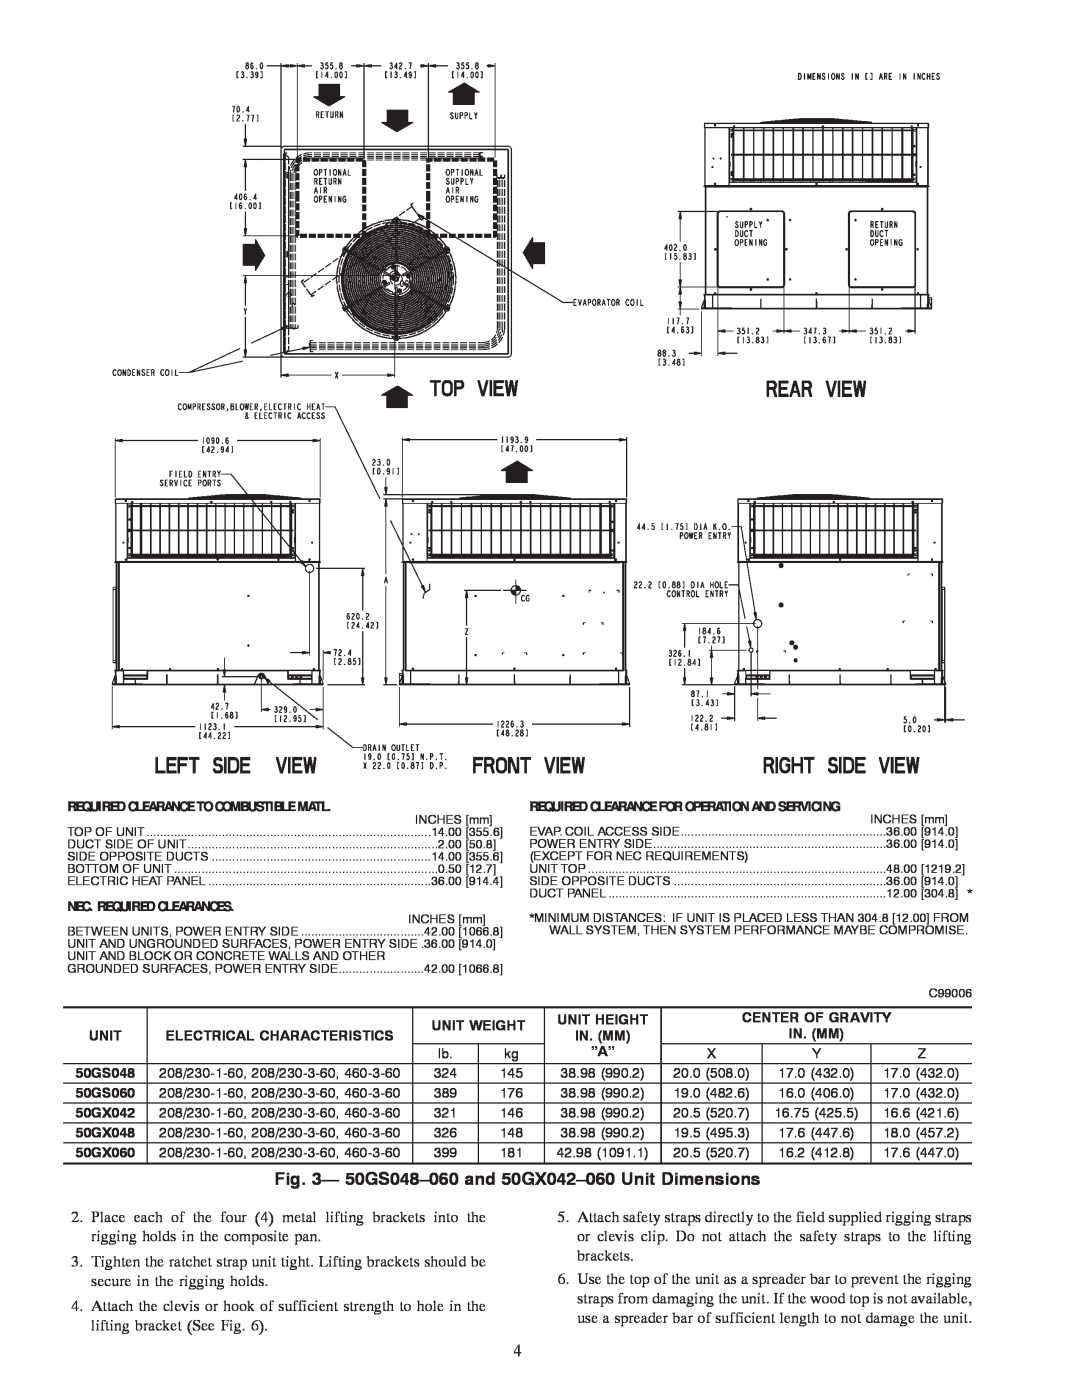 Carrier instruction manual 50GS048-060and 50GX042-060Unit Dimensions 